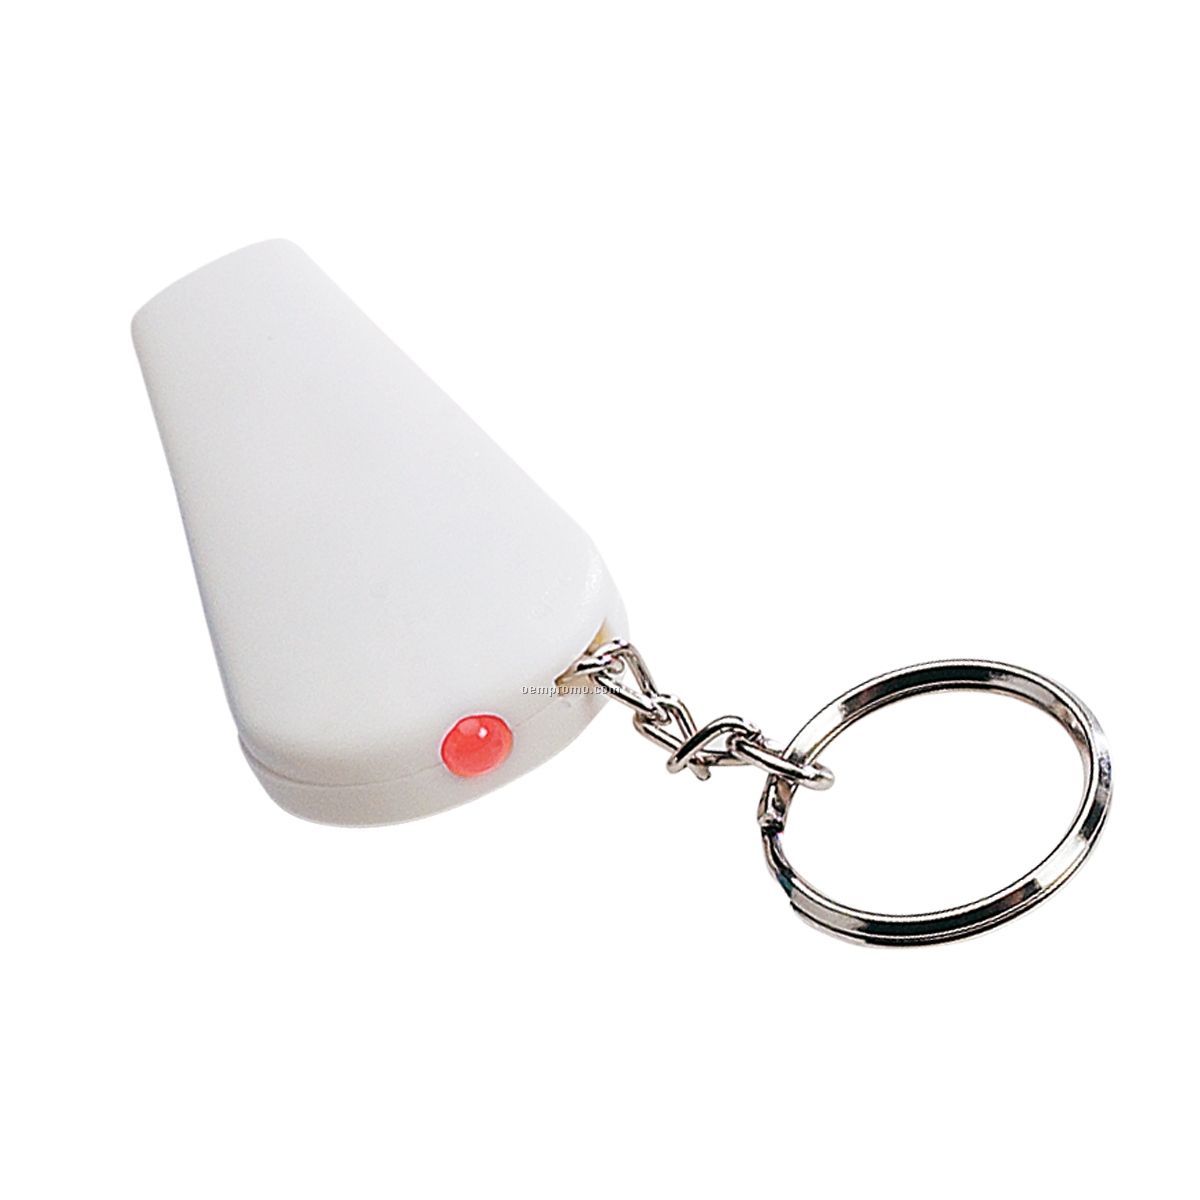 3-in-1 White Light Up Whistle Keychain W/ Red LED